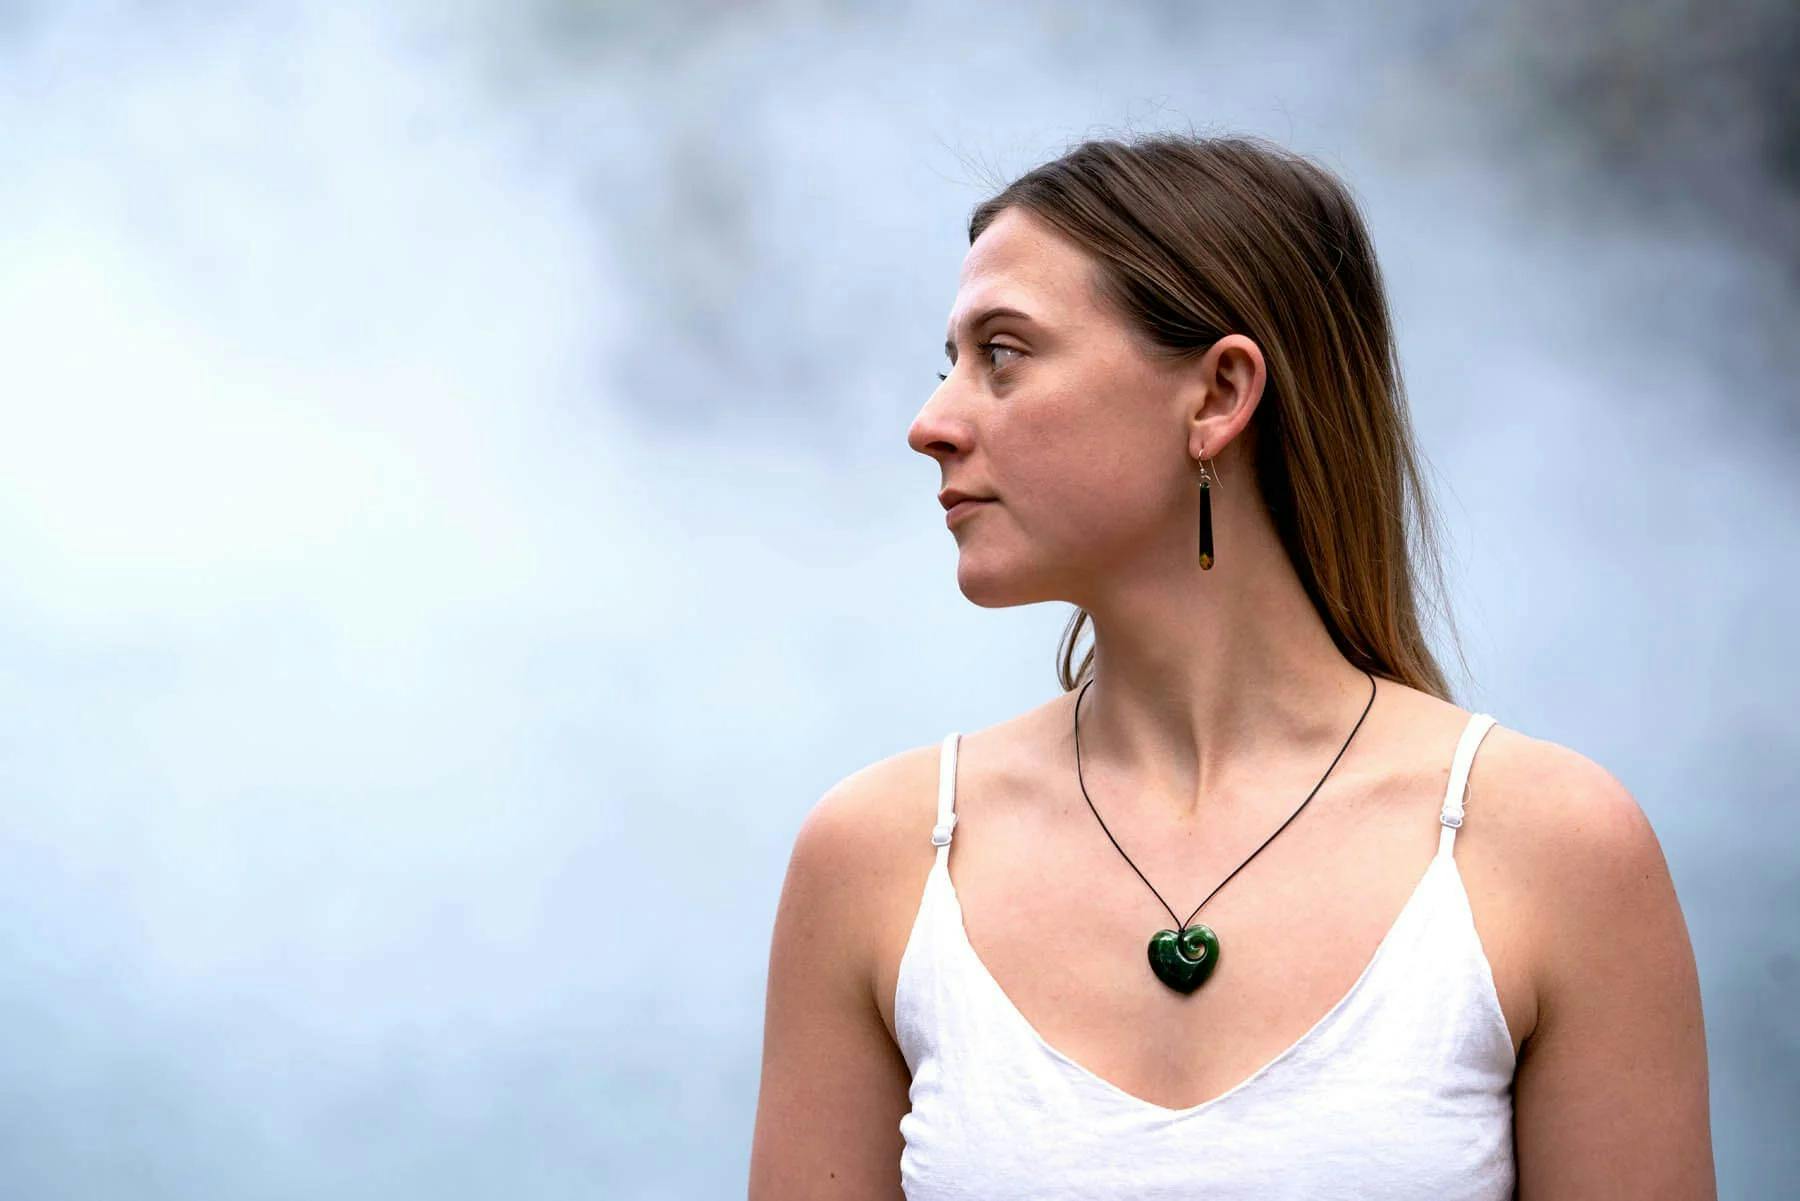 Woman wearing heart necklace with a misty backdrop